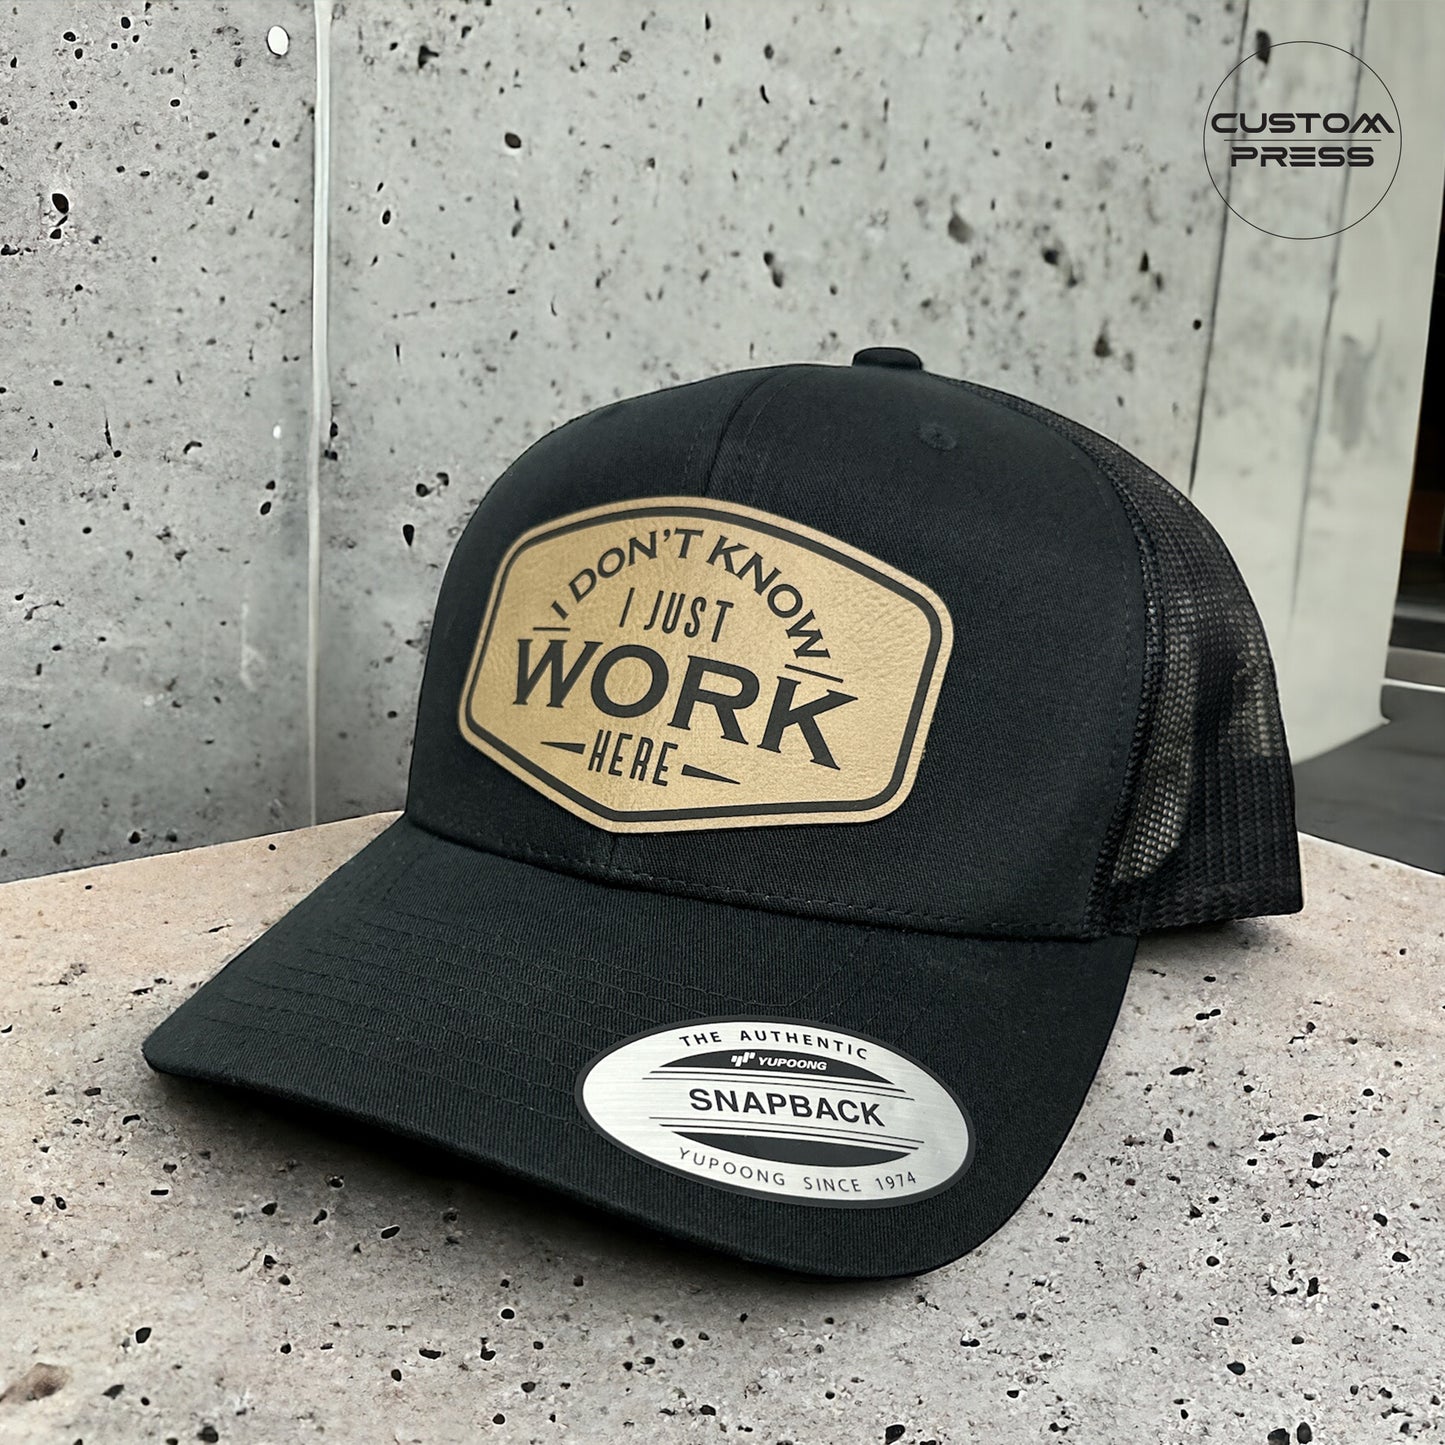 I don't know, I just work here Trucker Hat